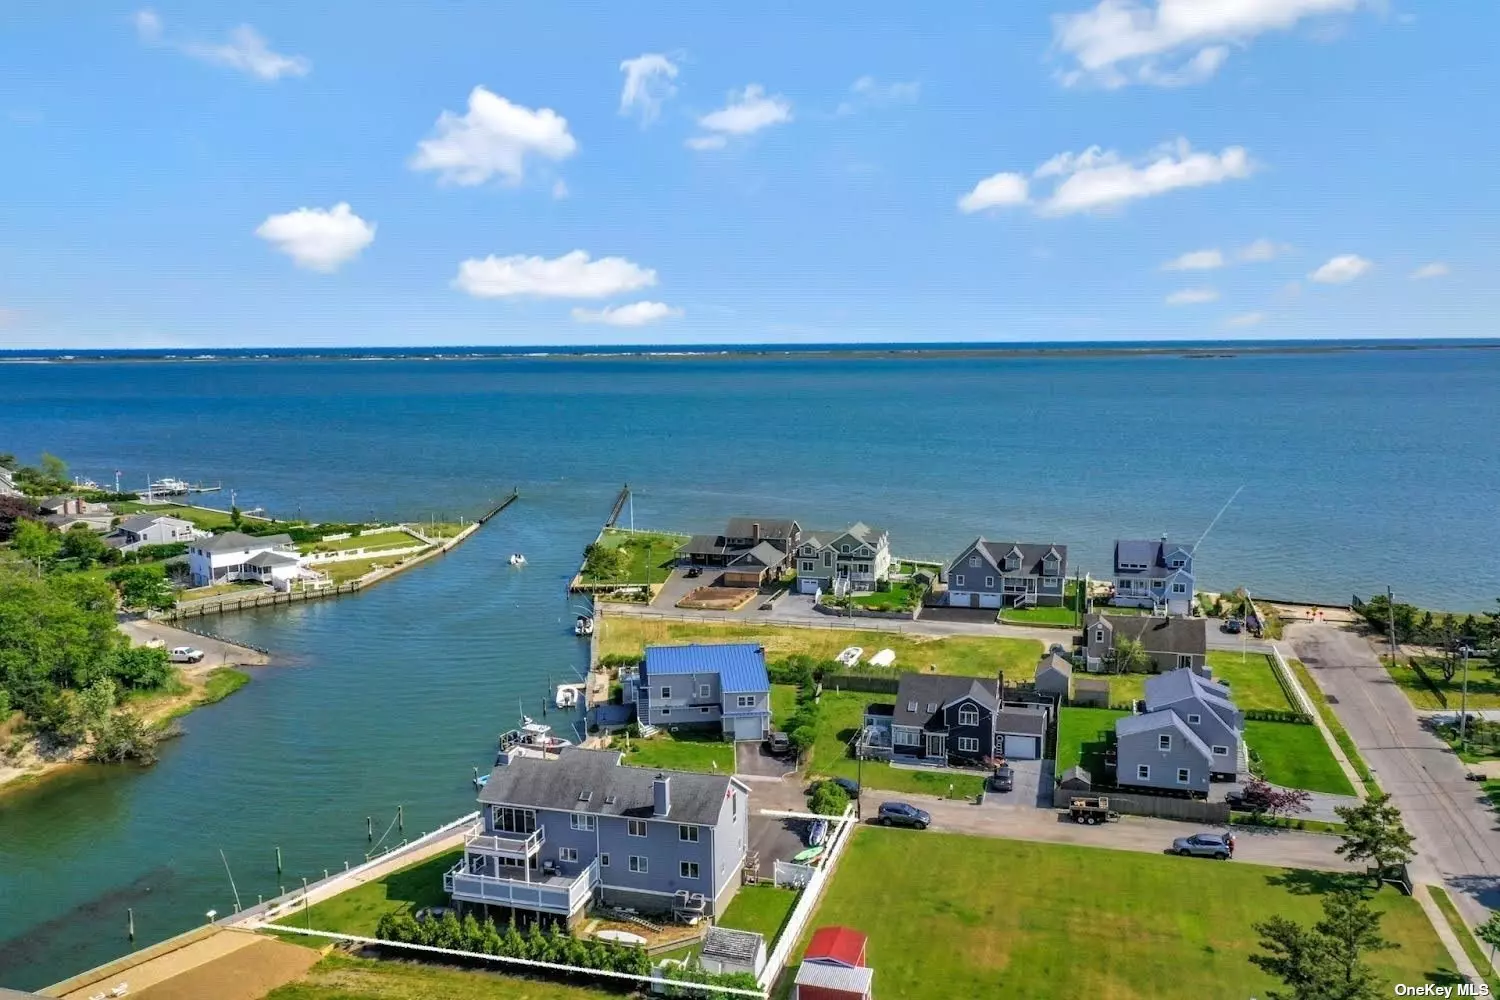 Waterfront Home with 107 ft Dock with Direct Access to Moriches Bay and Ocean. Deep Orchard Creek Canal With Endless Bay Views. Easy Access For Boating and Water Sport Enthusiasts. New Bulkhead (2021) This Home Was Lifted and Renovated in 2018. Features Harwood Flooring, Two Wood Burning Fireplaces, and Full Walk Out Basement .Large Driveway For Plenty of Parking. This Home Has So Much To Offer. Four Bedrooms With The Primary En Suite Offering Bucolic Views Of The Canal and Bay Each and Every Day. A True Respite With Wood Burning Fireplace For Total Ambiance. There Is Also An Open Loft Space For Quiet Moments. The Kitchen Offers Stainless Appliances As Well As Plenty Of Cabinetry and Counterspace. Sliders Overlooking A Large Mahogany Deck For Entertaining. Front Mahogany Decking. Front Paver Patio And Rear Paver Patio with Brick Firepit and Seating. This Home Is Perfect For Year Round Living Or A Summer Retreat For Family and Friends. Come See Your New Home.